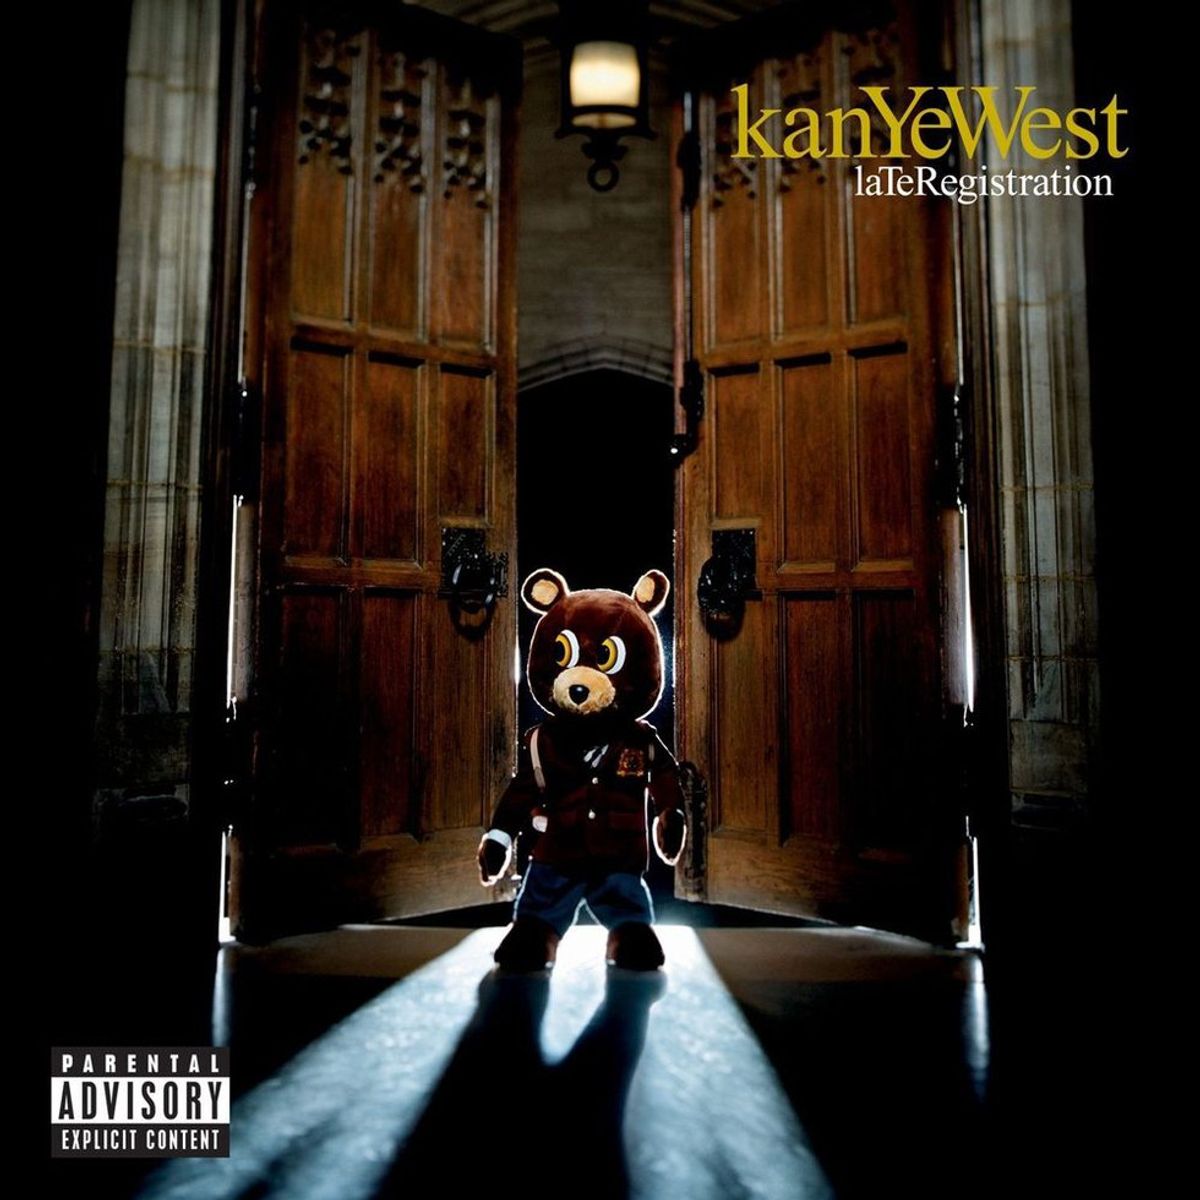 Throwback Review: Kanye West's "Late Registration"